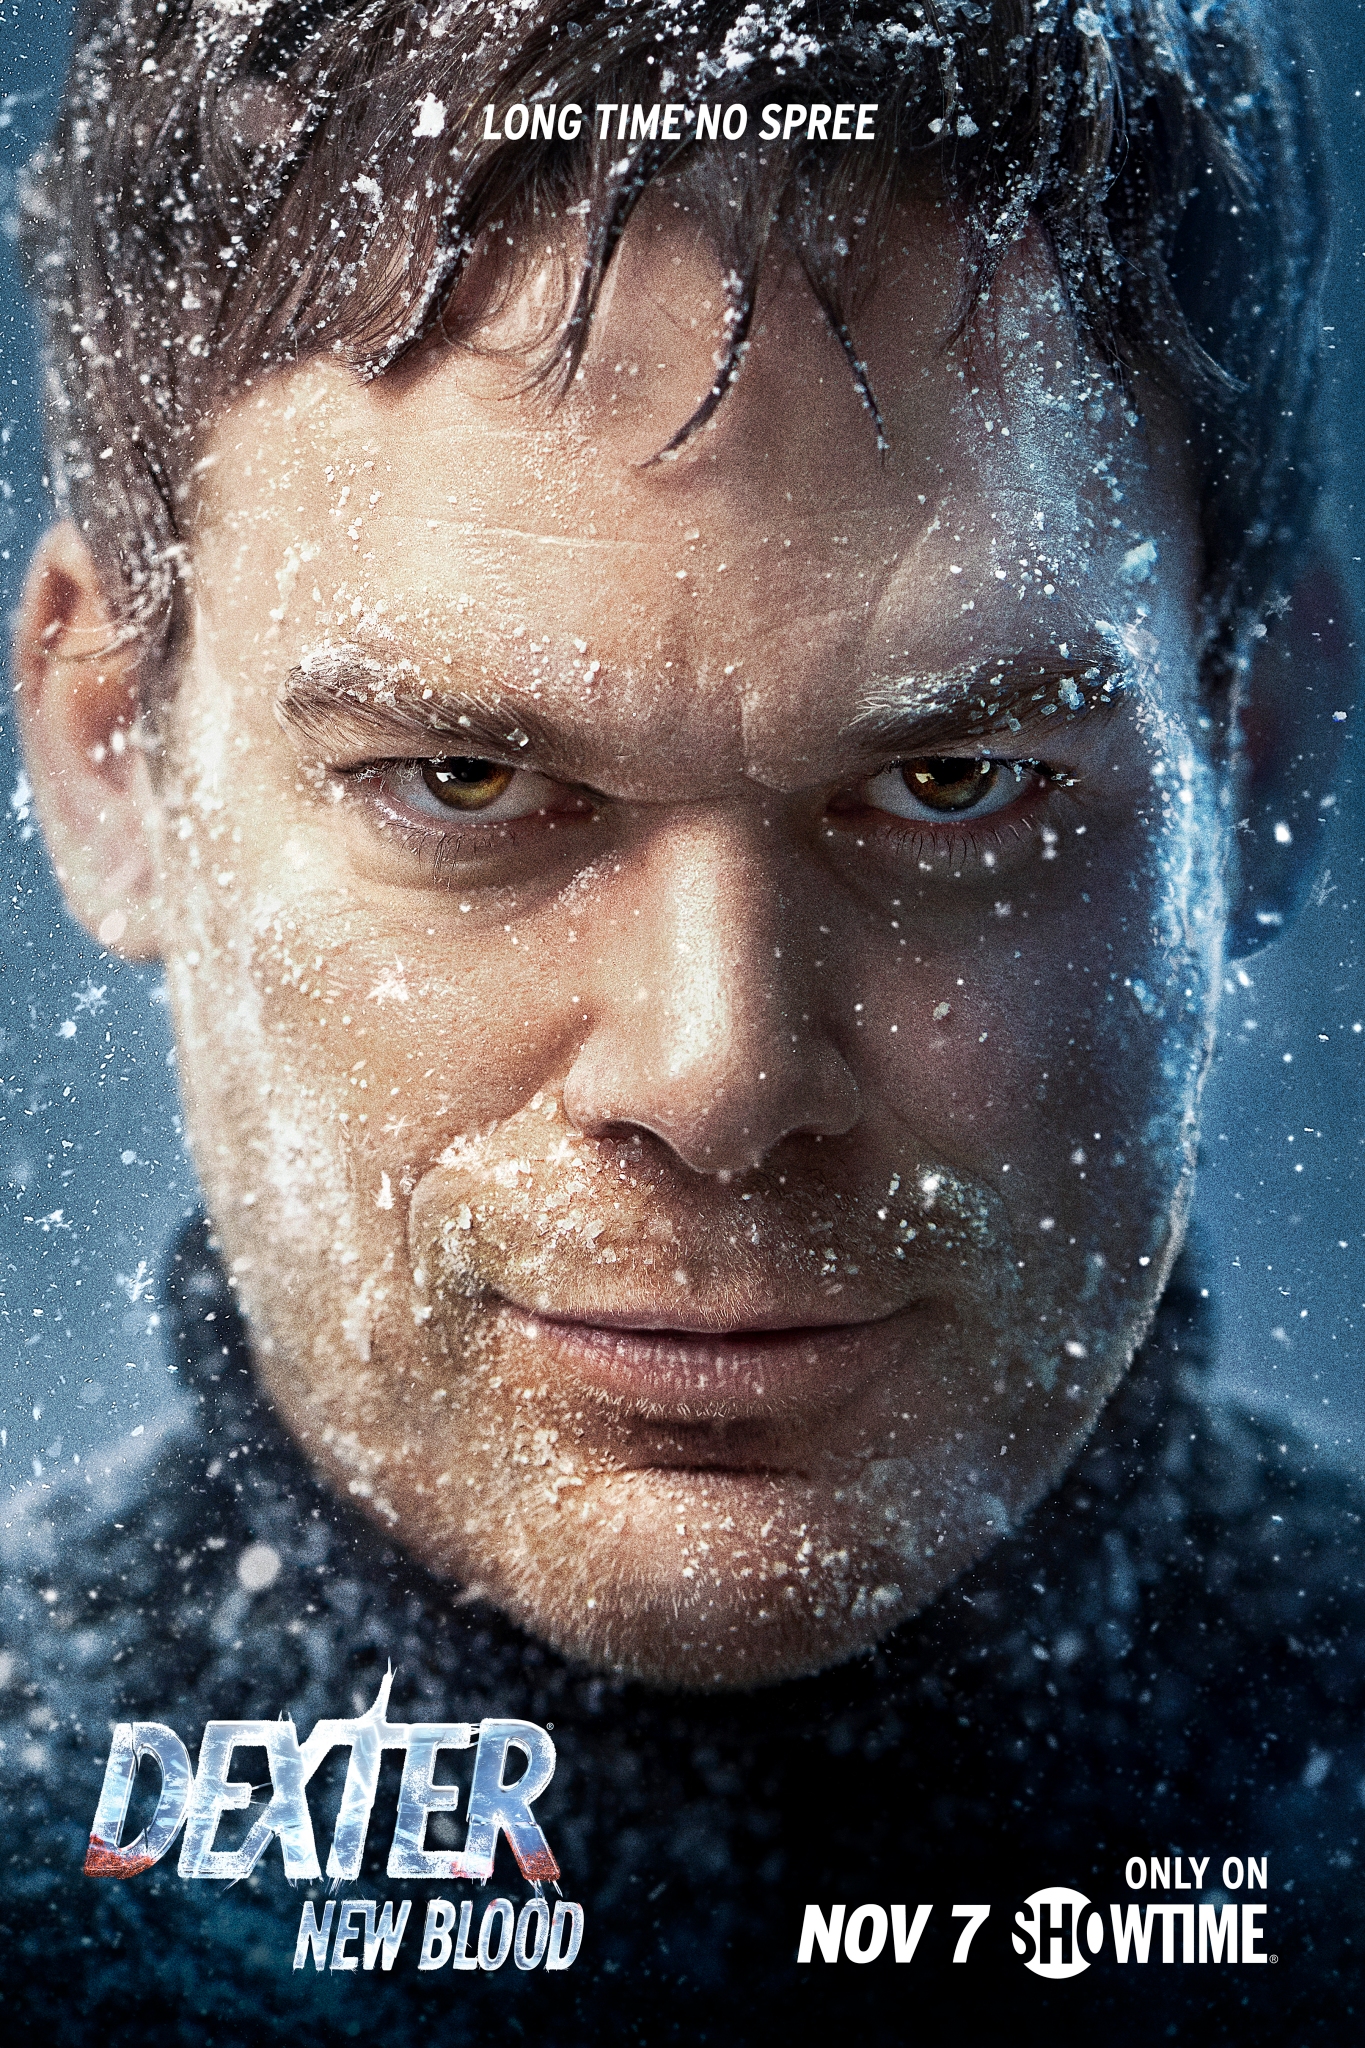 Dexter: New Blood Season 1: Release Date, Trailer, Cast and Latest Updates!